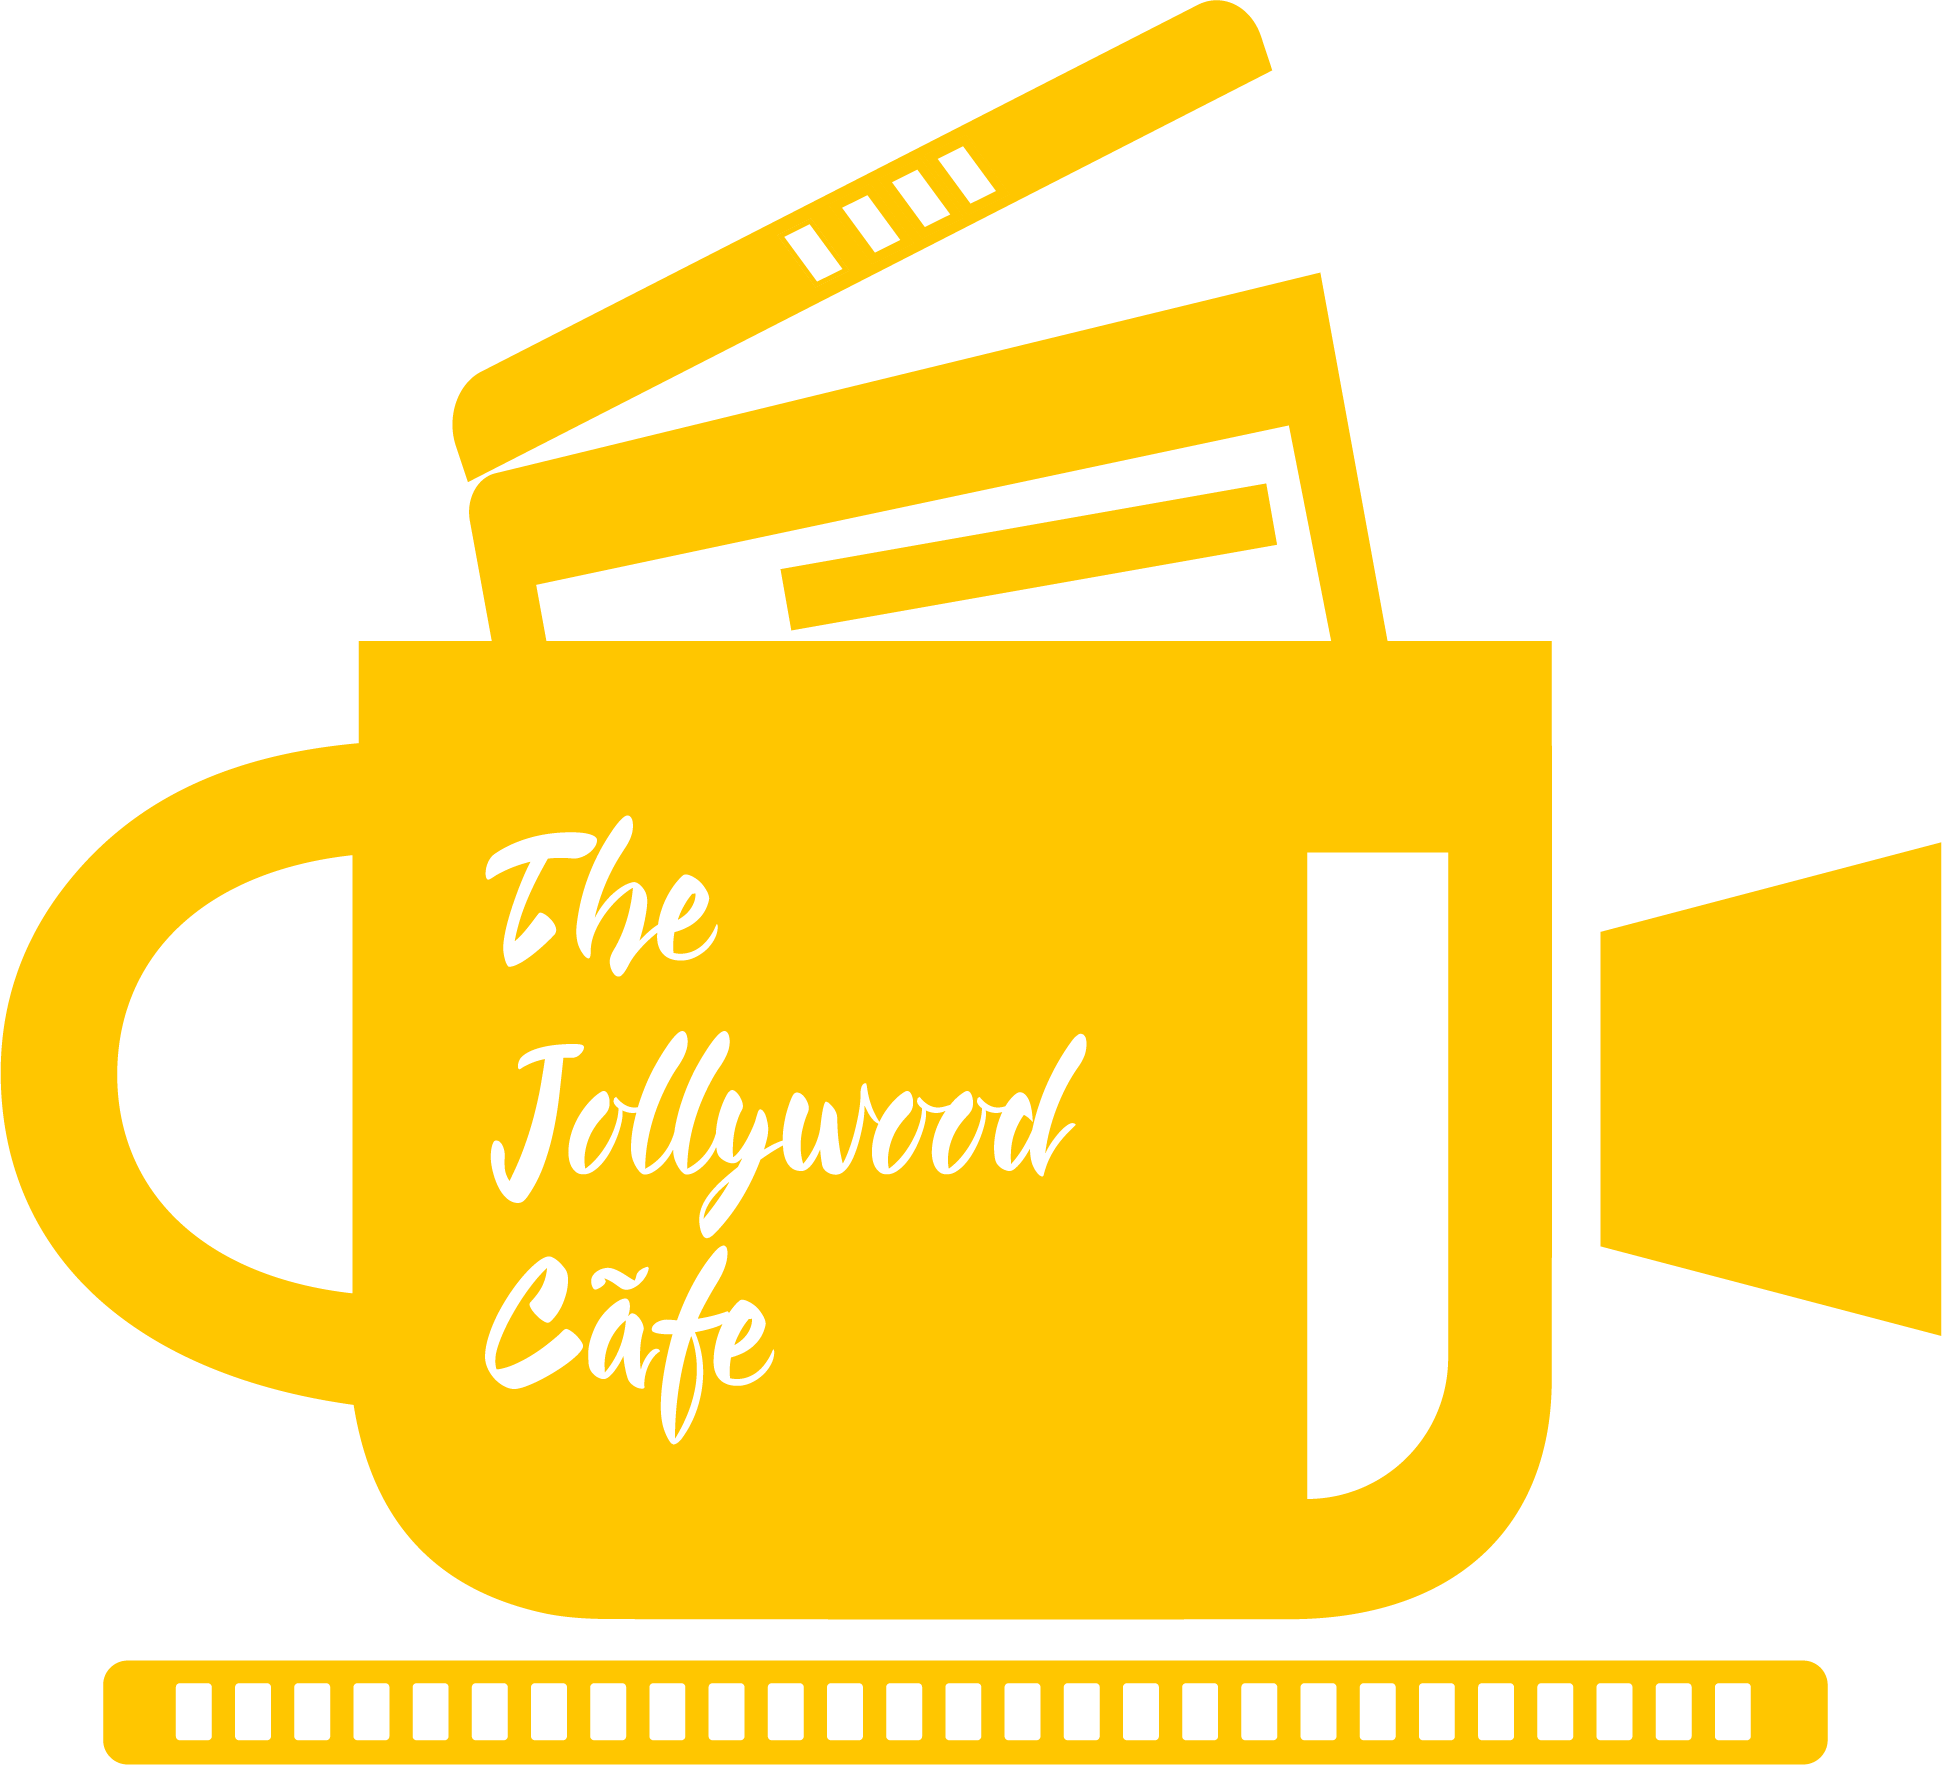 the jollywood cafe